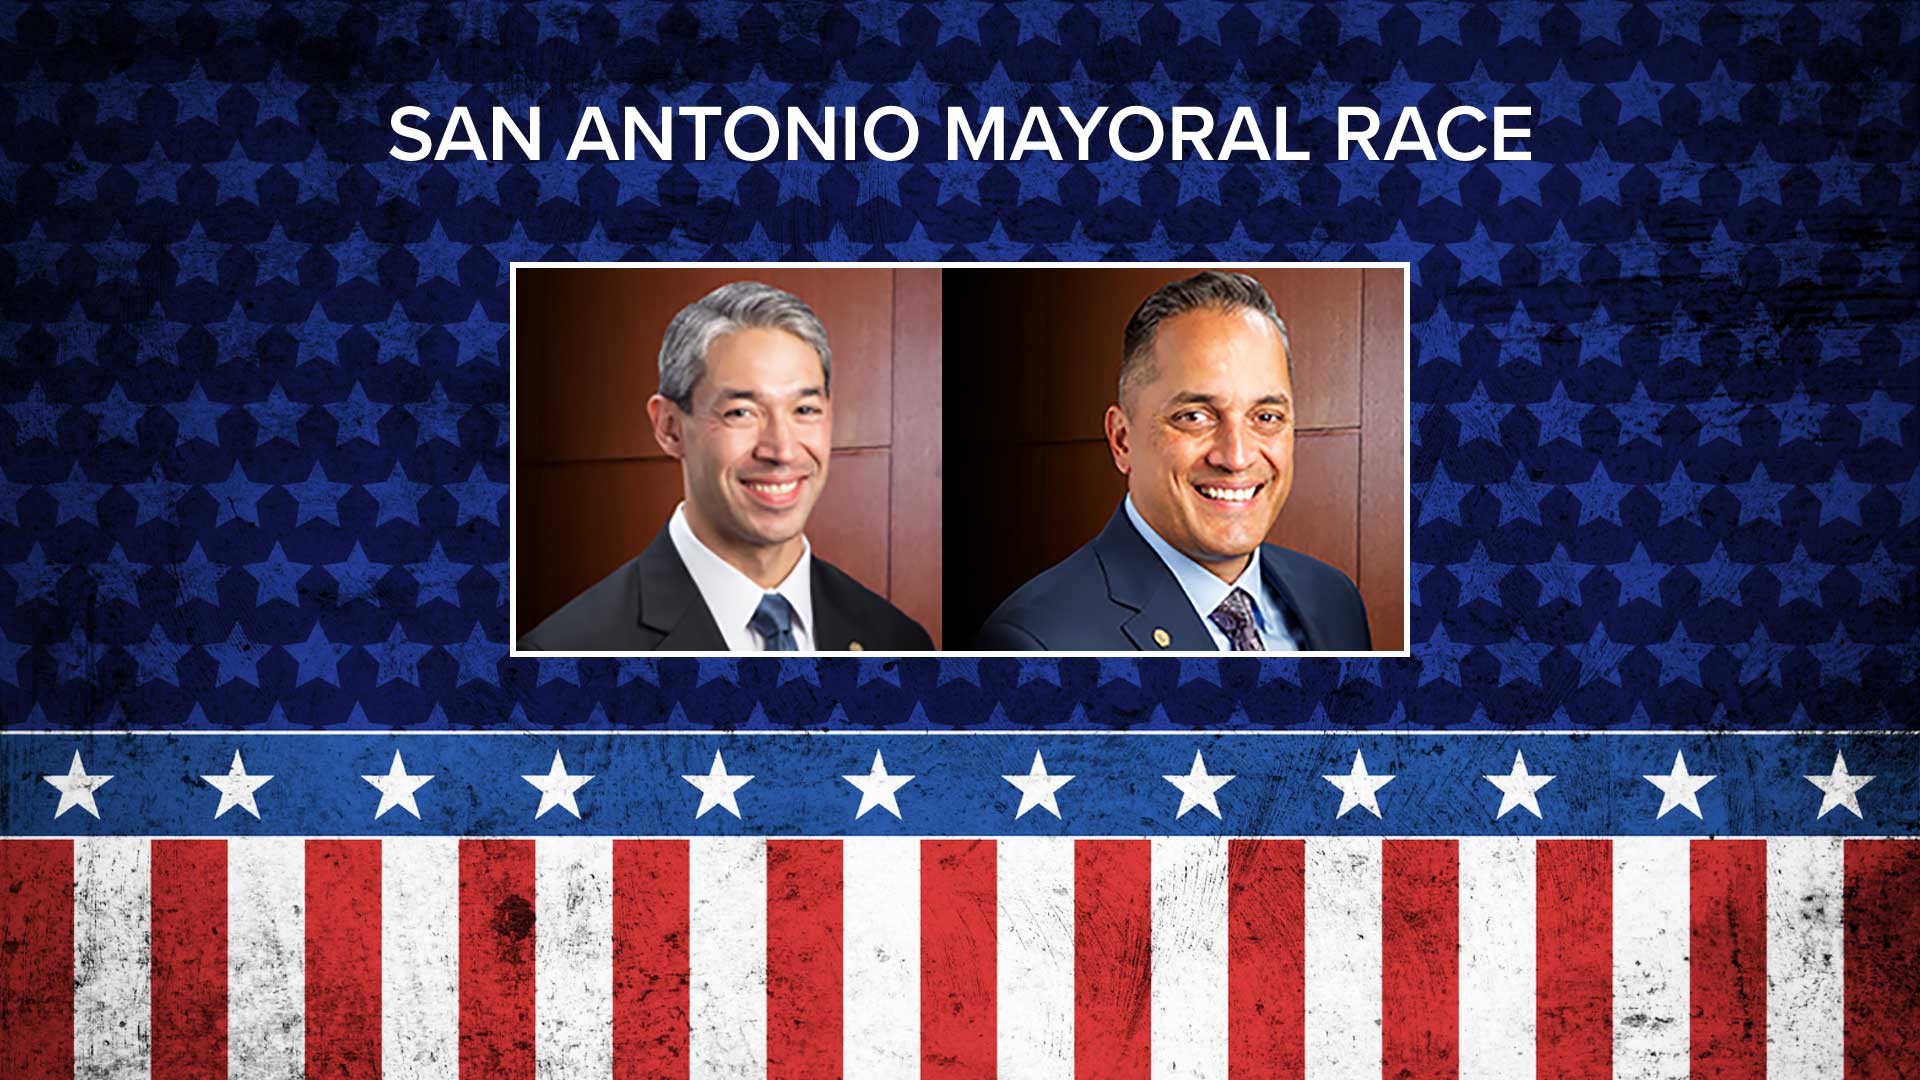 With election day just over the horizon, one political expert believes it's Ron Nirenberg's race to lose. But Proposition B is a toss-up.